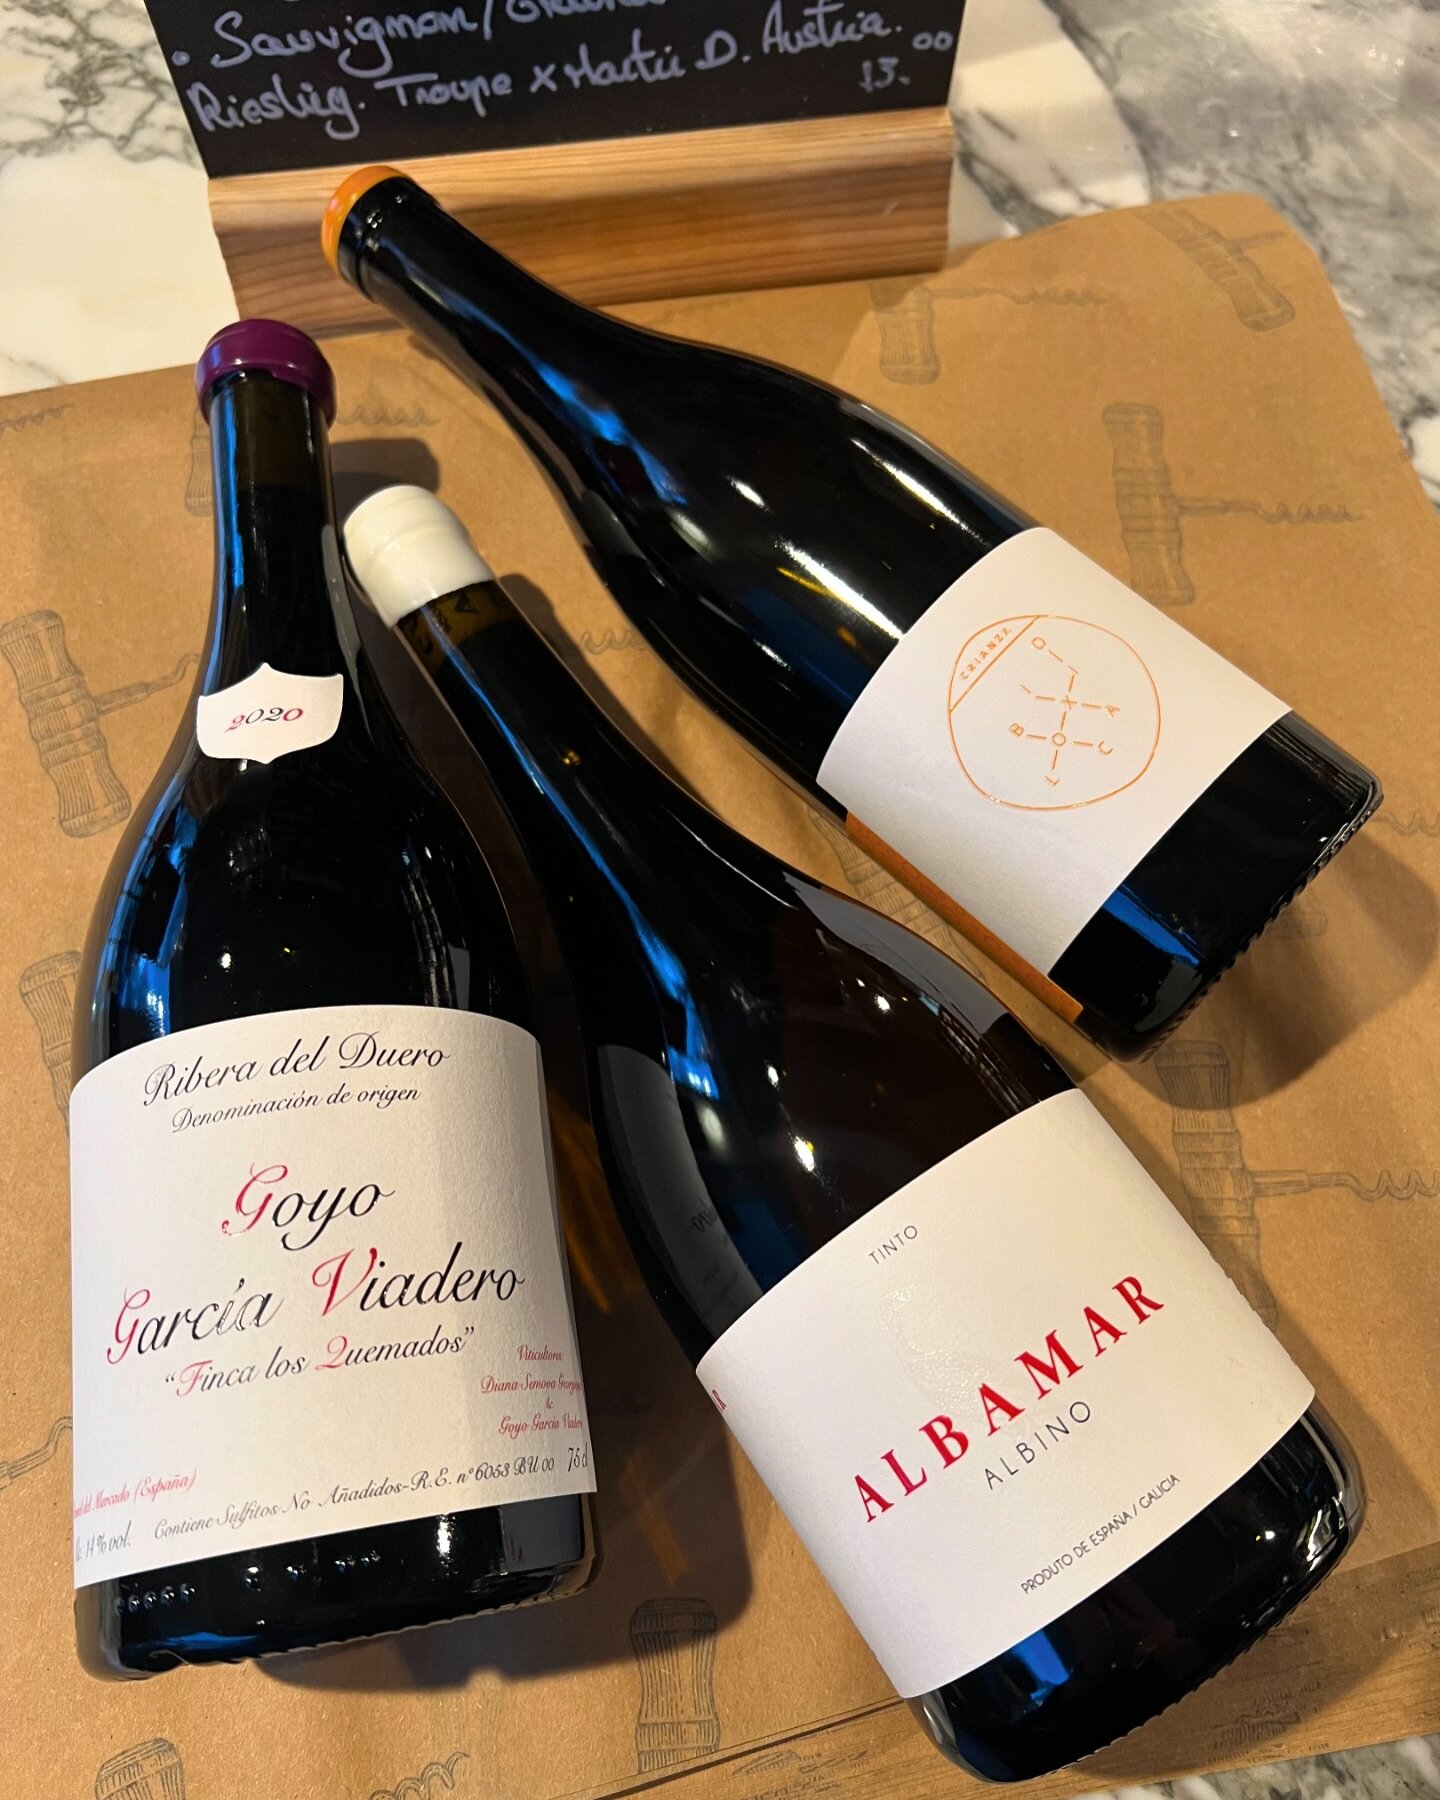 NEW WINE FRIDAY: We&rsquo;ve added three amazing and interesting Spanish wines to our shop. 1) a brilliant and concentrated organic/biodynamic Ribera del Duero from @goyogarciaviadero 2) barrel-aged white &ldquo;Albino&rdquo; from @albamarbodegas uti